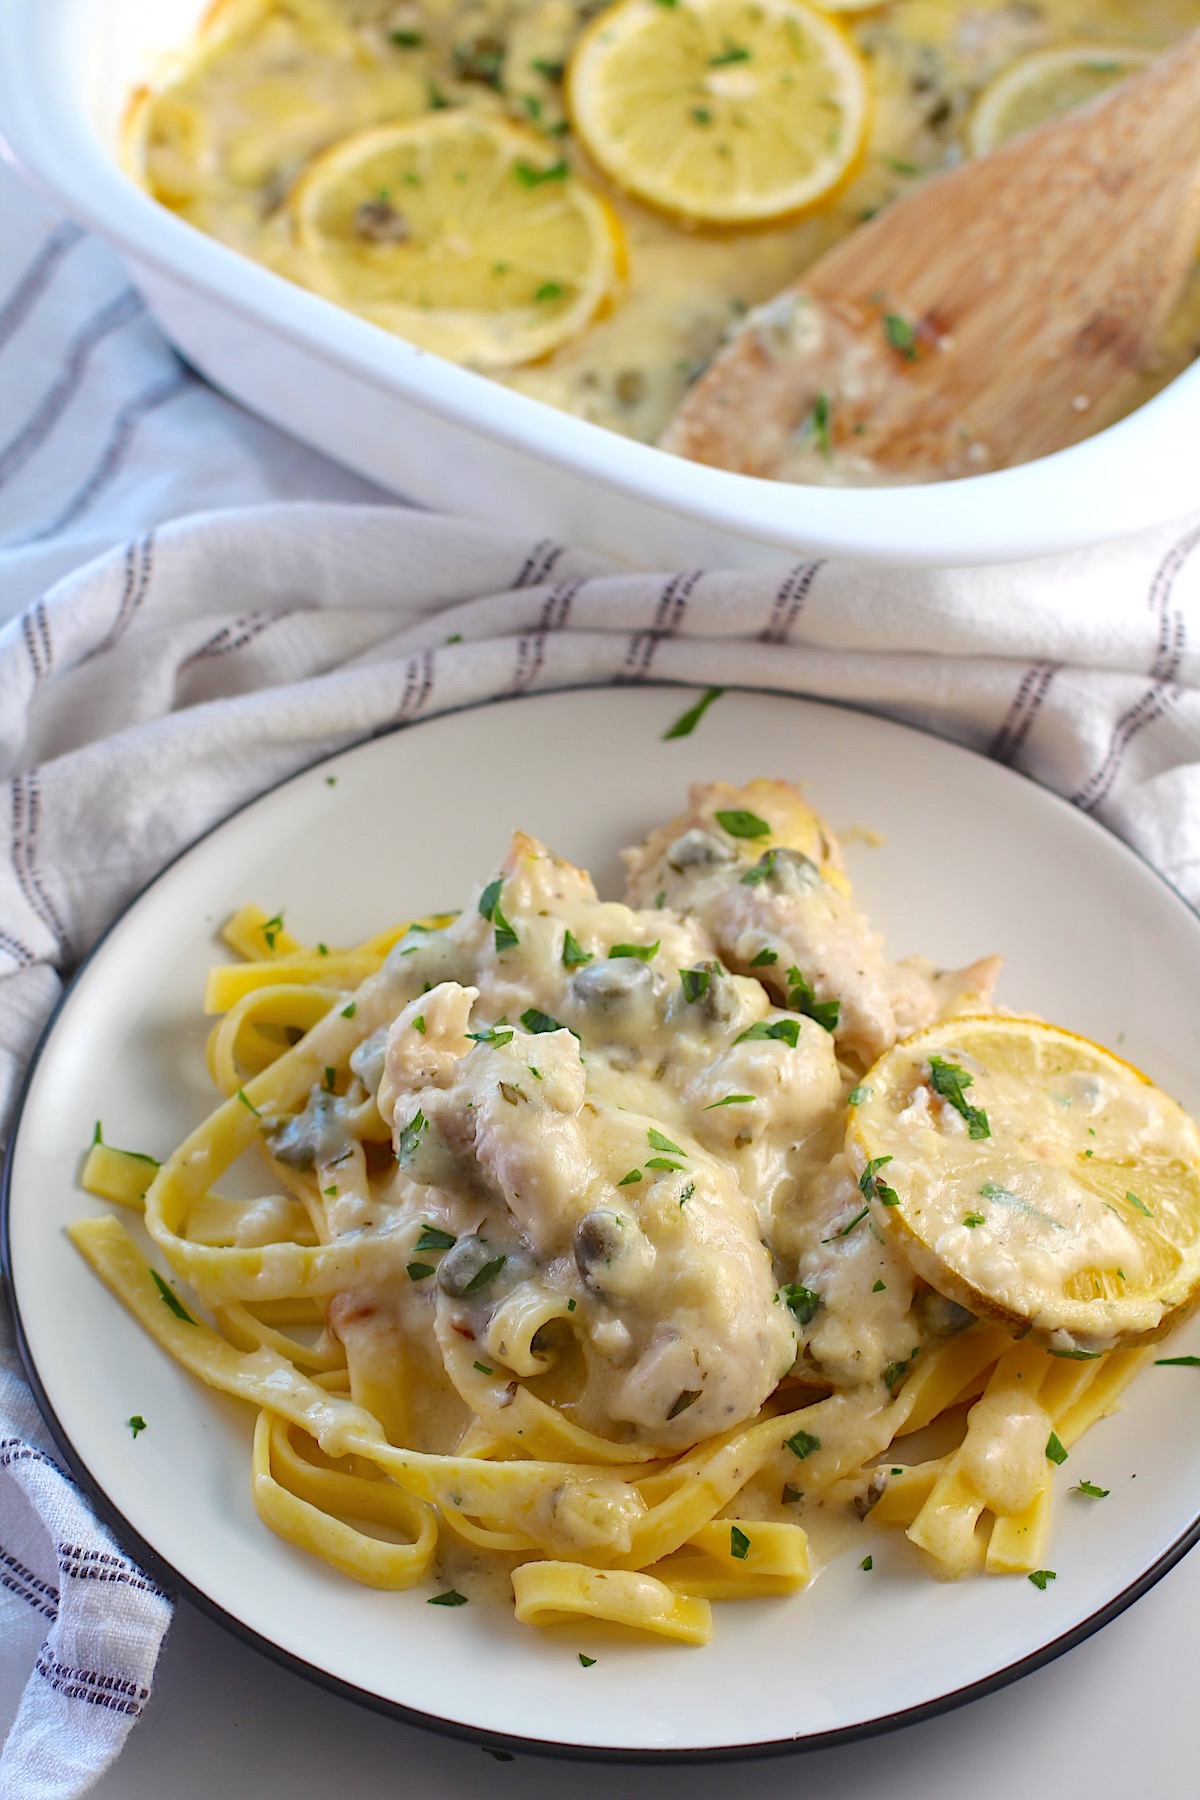 Creamy Chicken Piccata Casserole Recipe served on a plate over pasta with the casserole dish in the background.